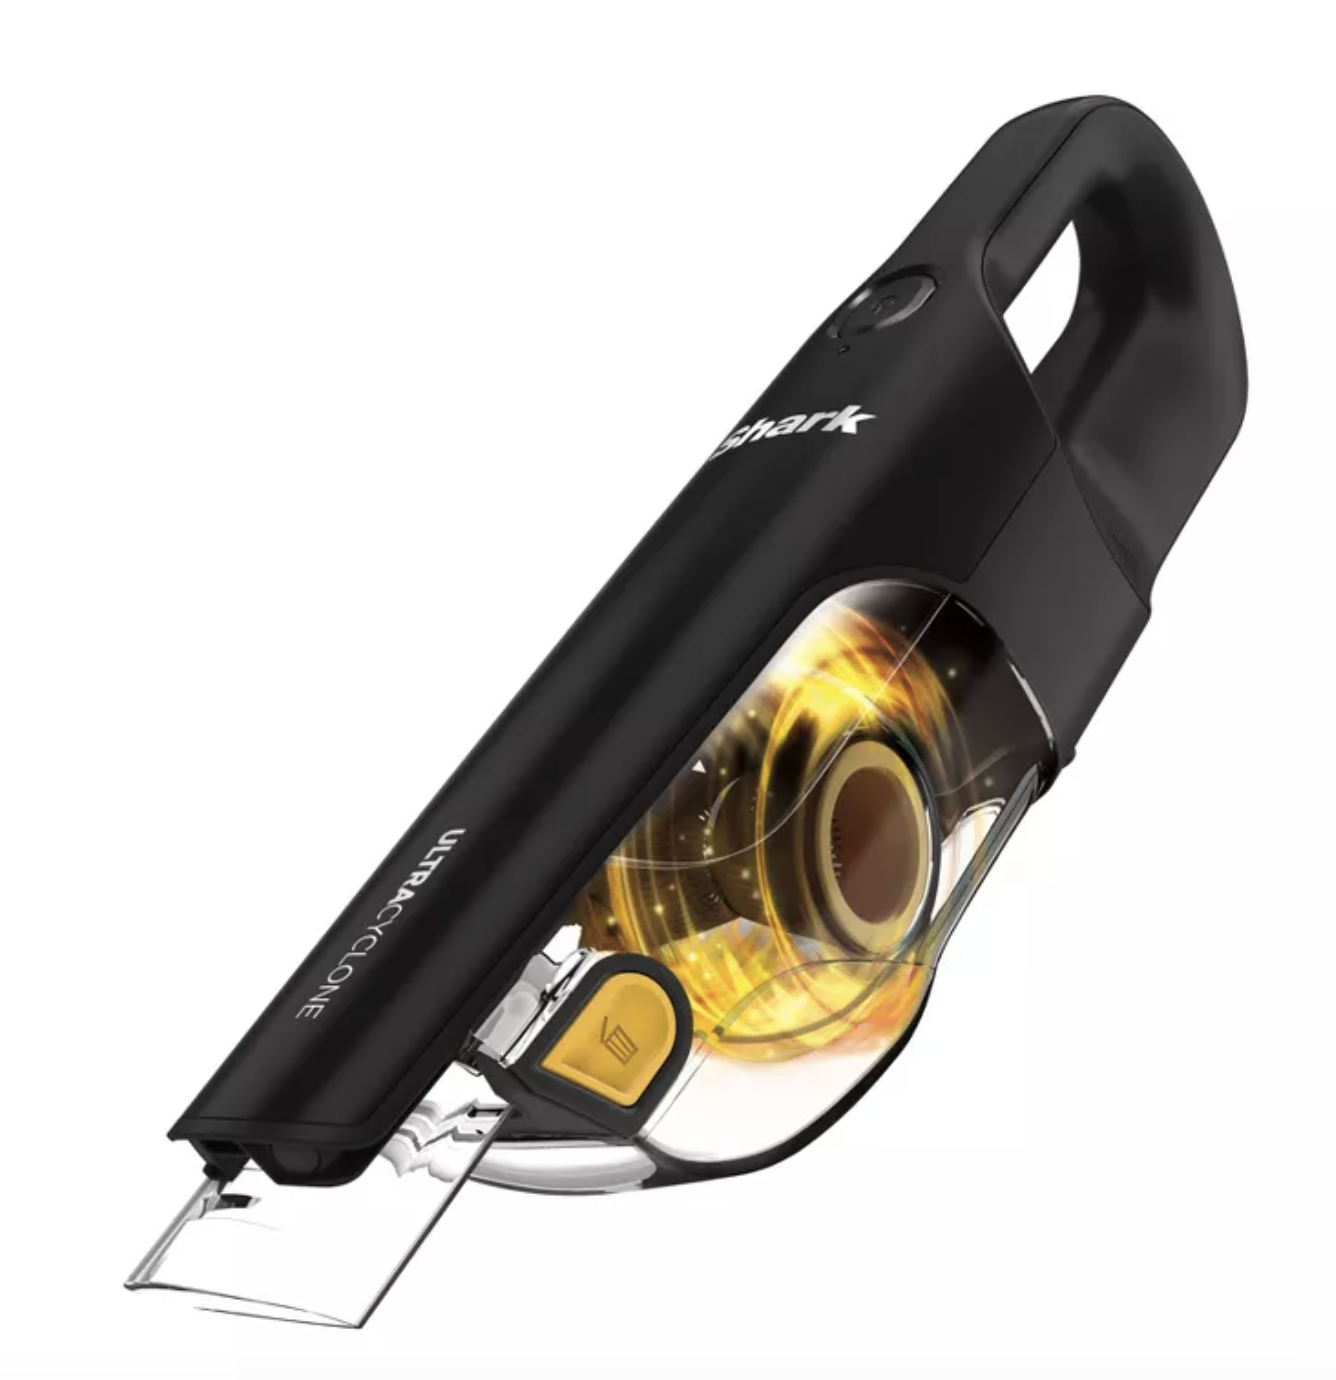 A black cordless vacuum with yellow buttons